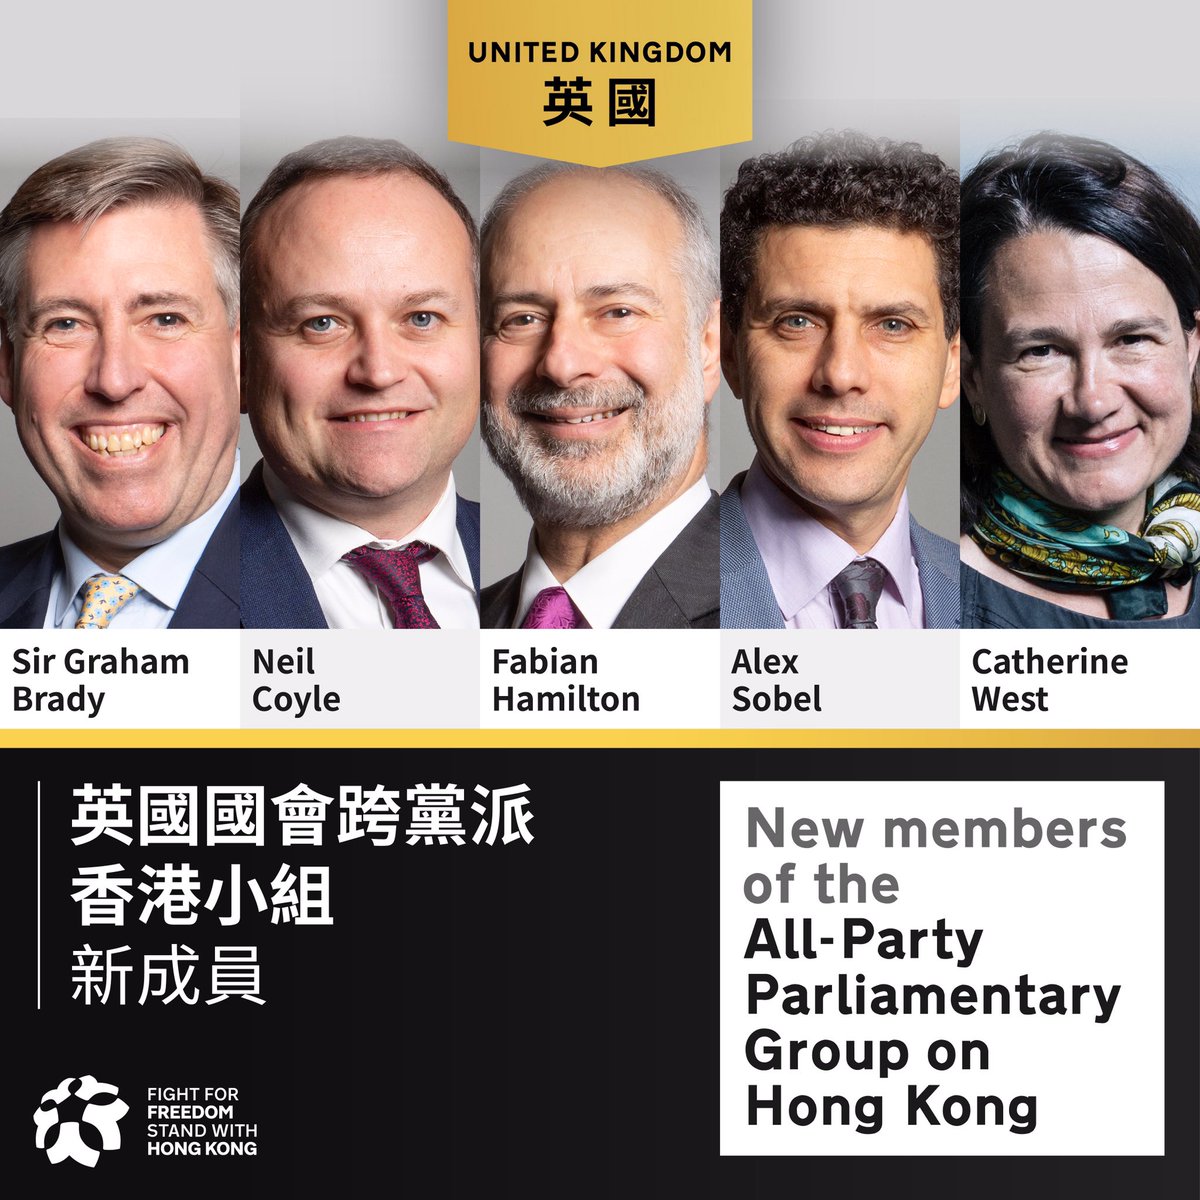 SWHK welcomes five new members from the UK House of Commons—Sir Graham Brady, Neil Coyle @coyleneil , Fabian Hamilton @FabianLeedsNE, Alex Sobel @alexsobel, and Catherine West @CatherineWest1—the All-Party Parliamentary Group on Hong Kong (APPG-HK).